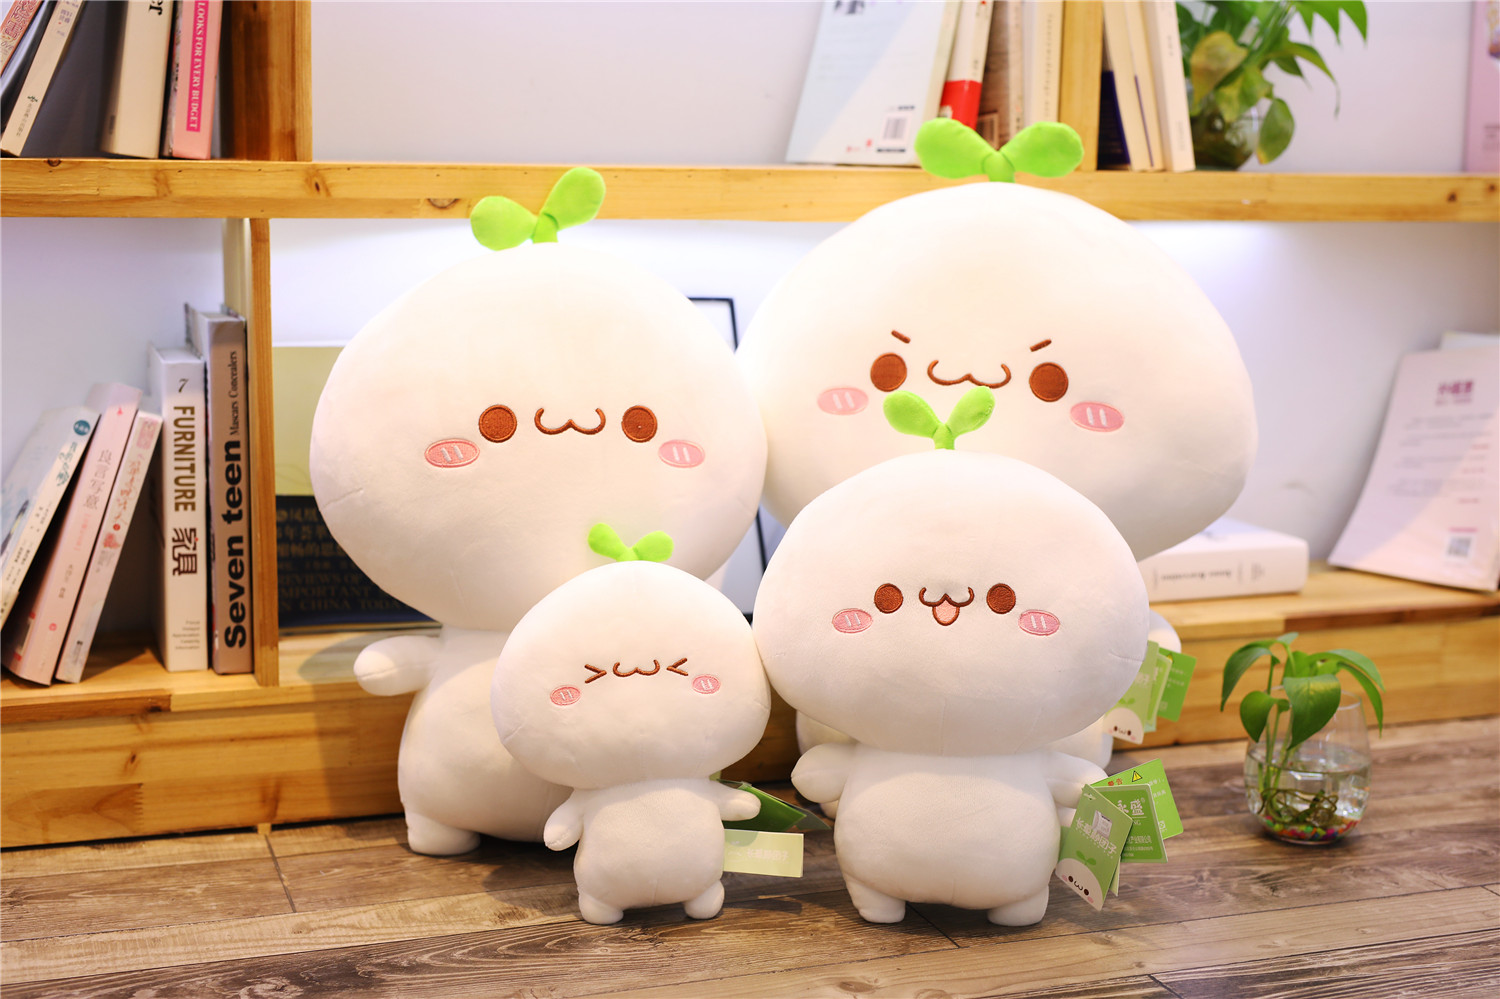  Micro Onion Plush Collectible Comfort Plush Toy : Handmade  Products